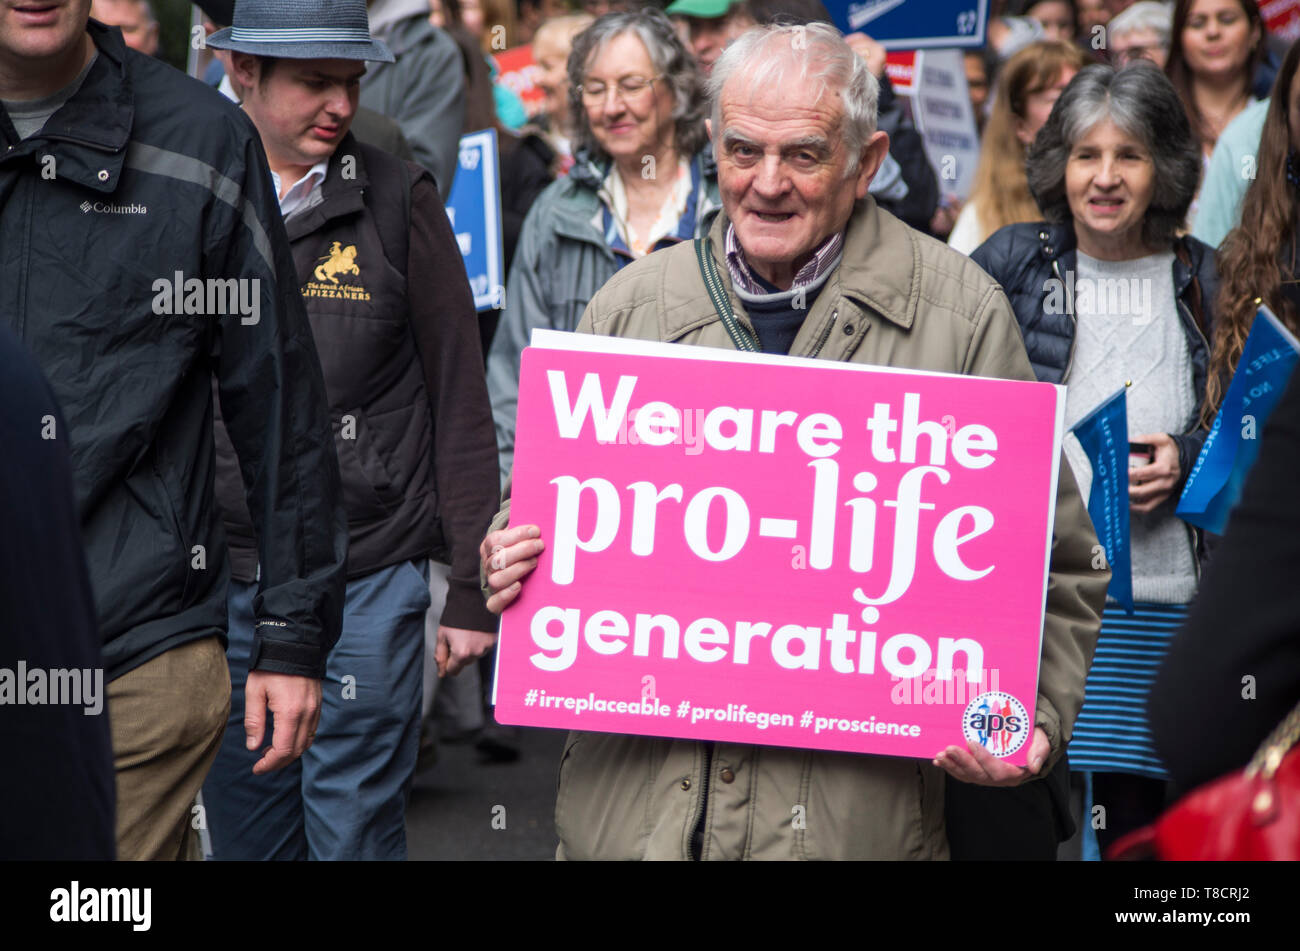 London, UK. 11 April 2019. Pro-life demonstrators take part in March for Life UK 2019 through Westminster, London.  This year's theme is 'irreplaceable’ – every single human being, right from the first moment of his or her conception is unique,  he/she cannot be replaced by any other human being. © Stuart Walden/ Alamy Stock Photo